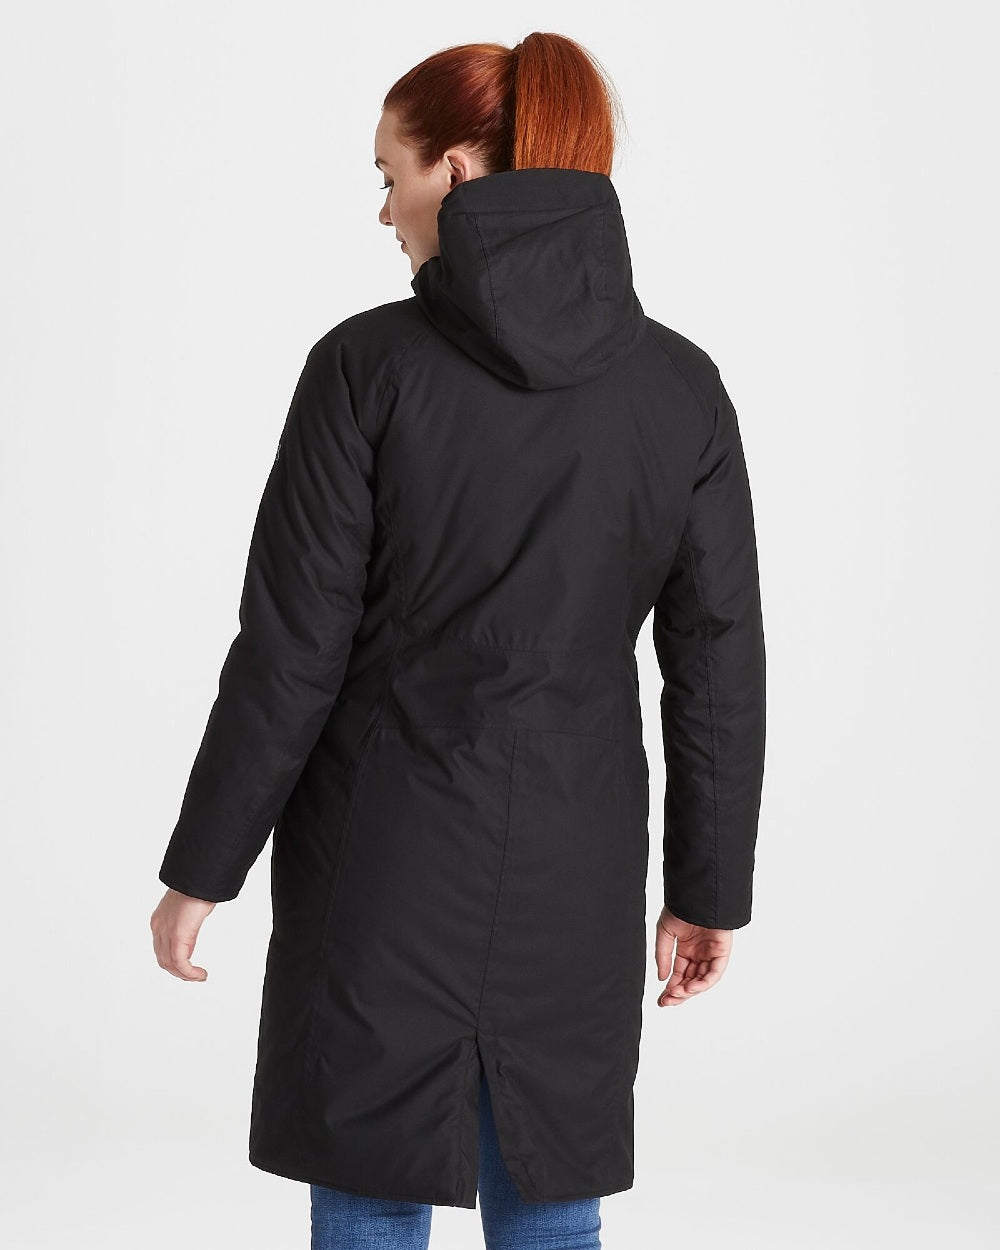 Craghoppers Caithness Long Waterproof Jacket in Black 